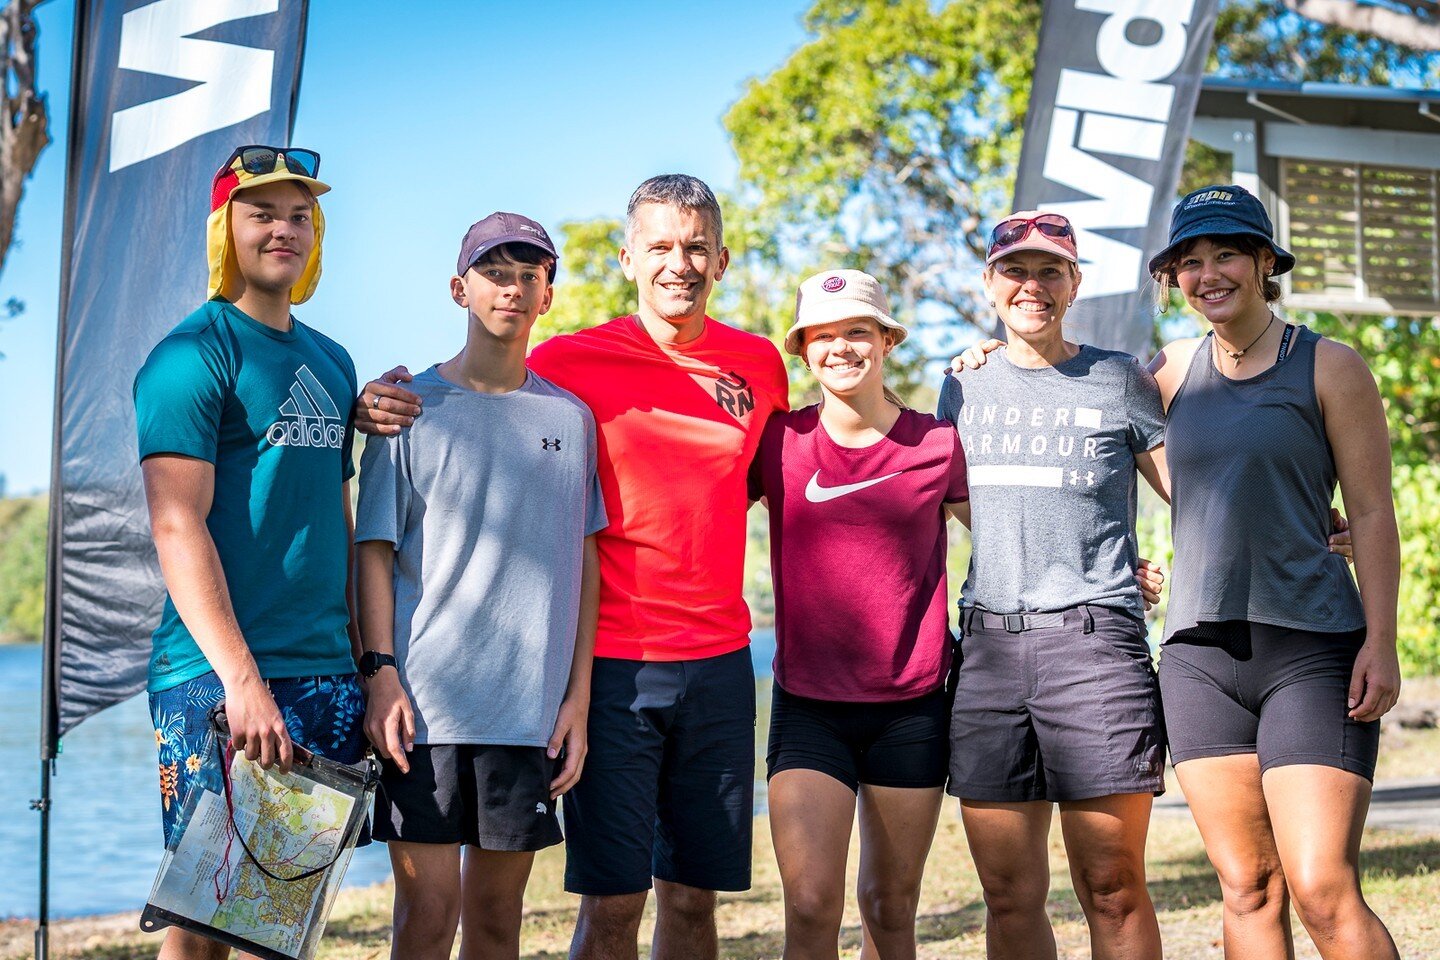 ARWS OCEANIA YOUTH INITIATIVE

As parents with active teenagers and adventure racers we're very passionate about introducing the next generation of adventure racers to the sport. And we know we're not the only ones. To support this, as an Adventure R